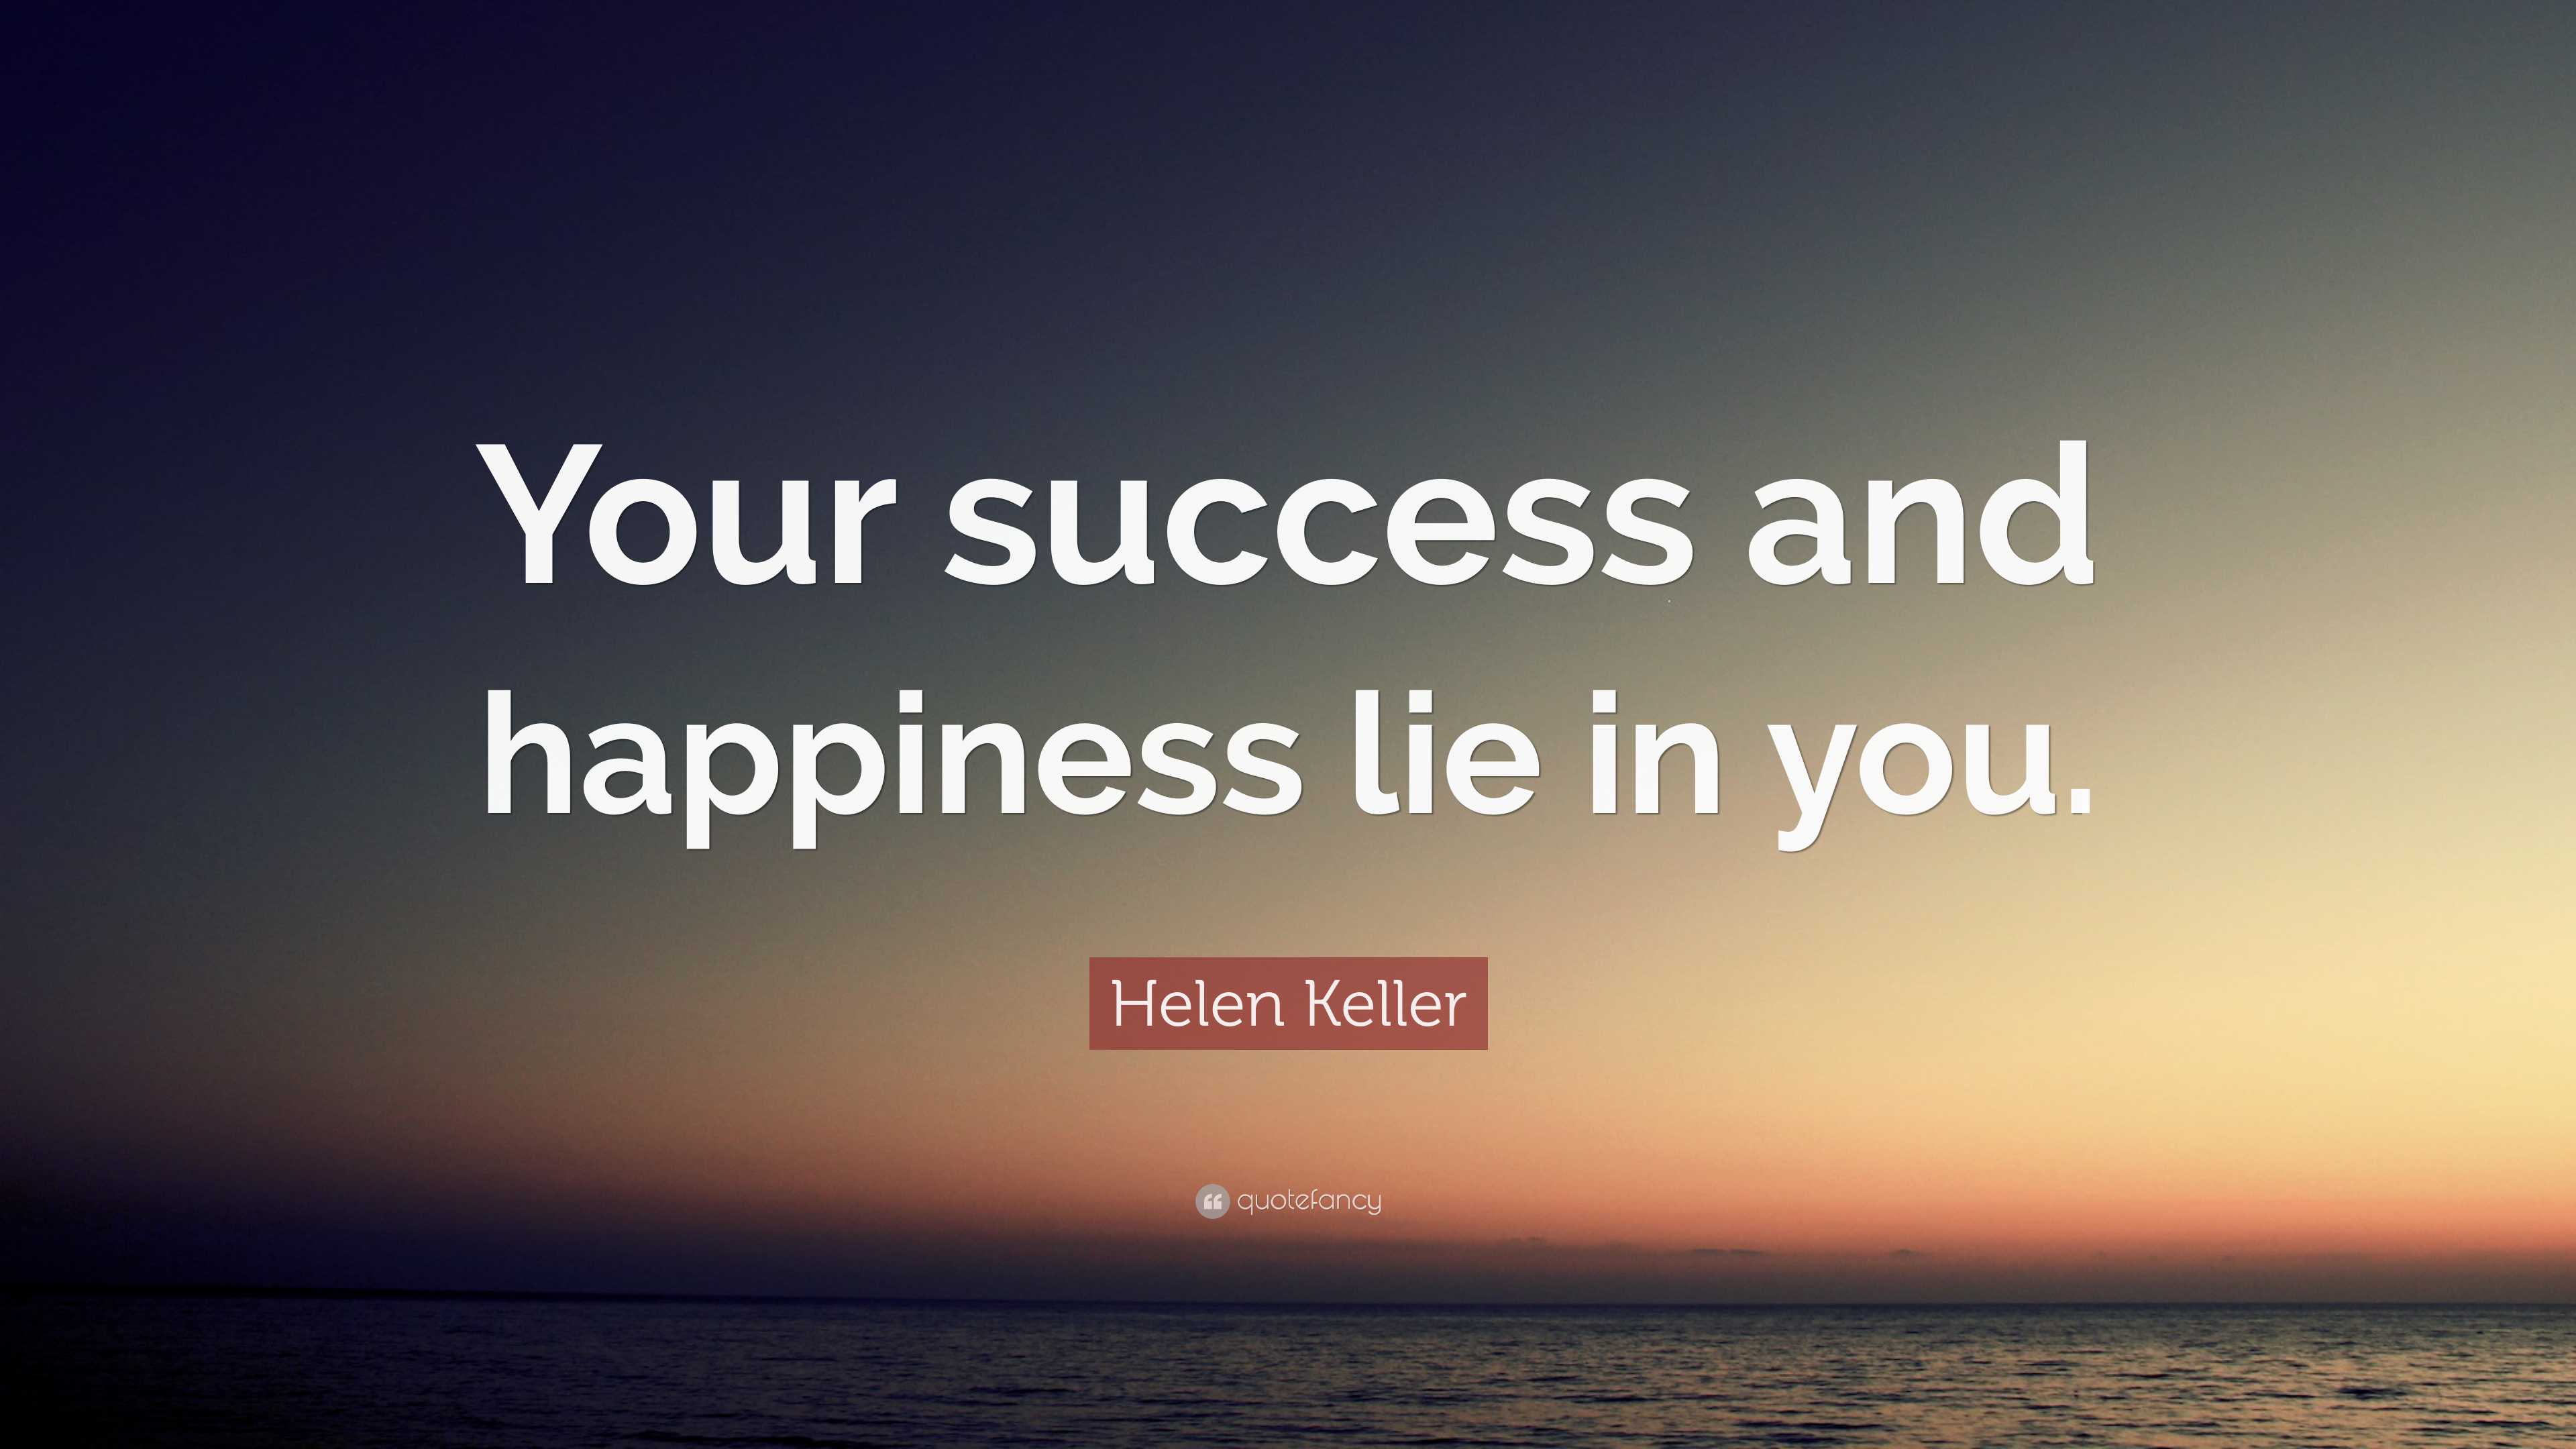 Helen Keller Quote Your Success And Happiness Lie In You